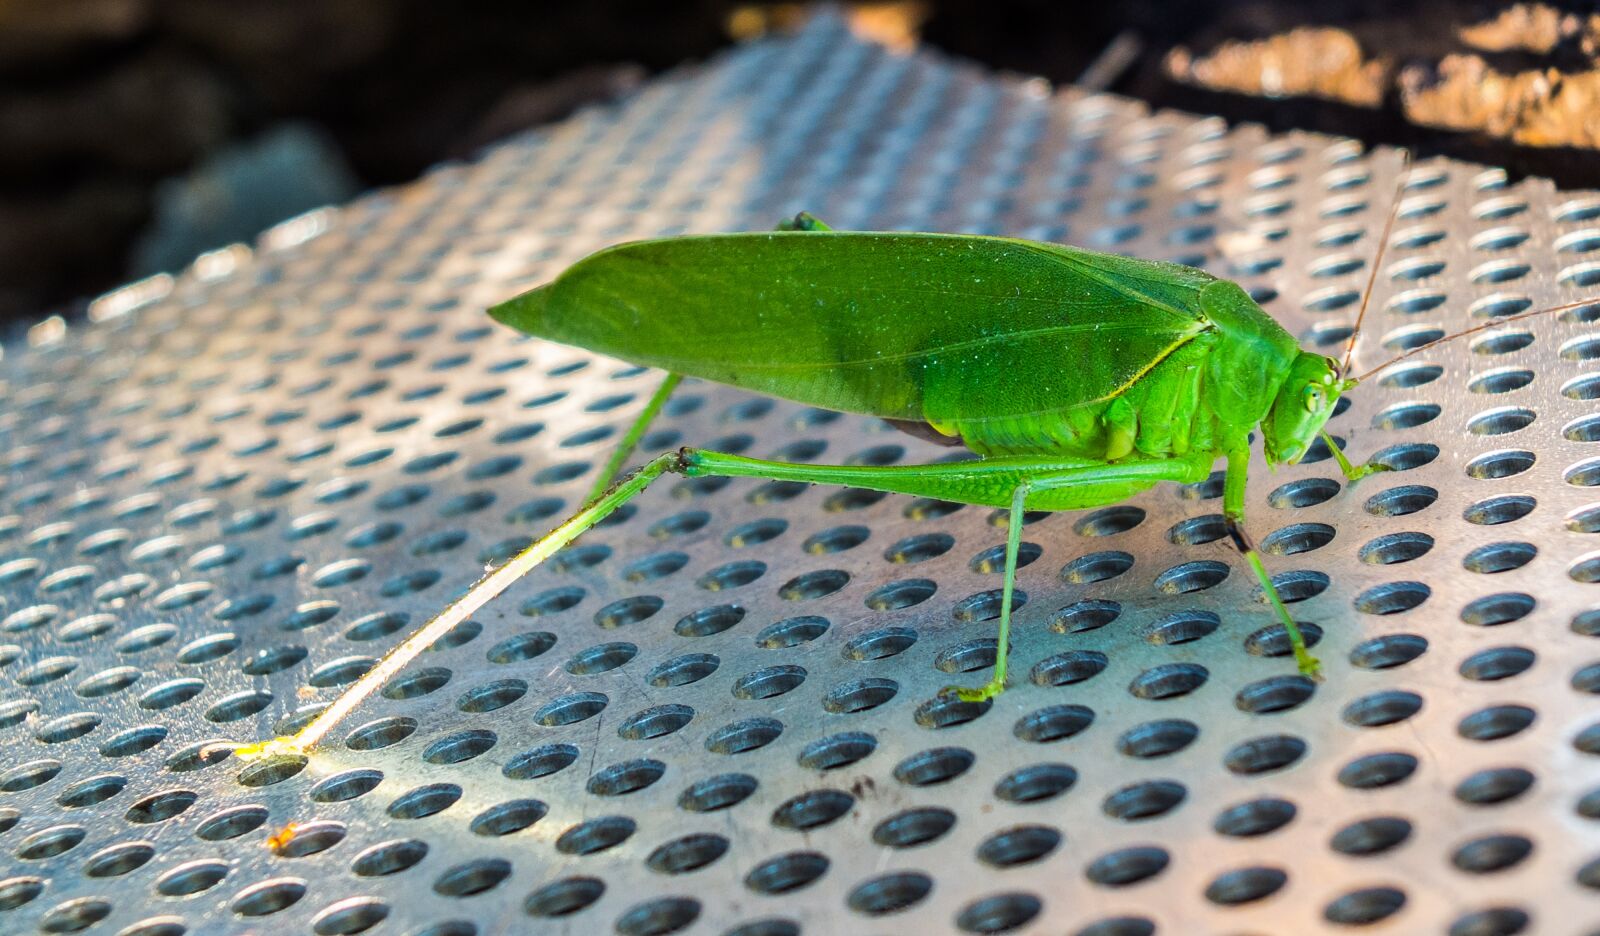 Fujifilm X-S1 sample photo. Grasshopper, insect, close up photography